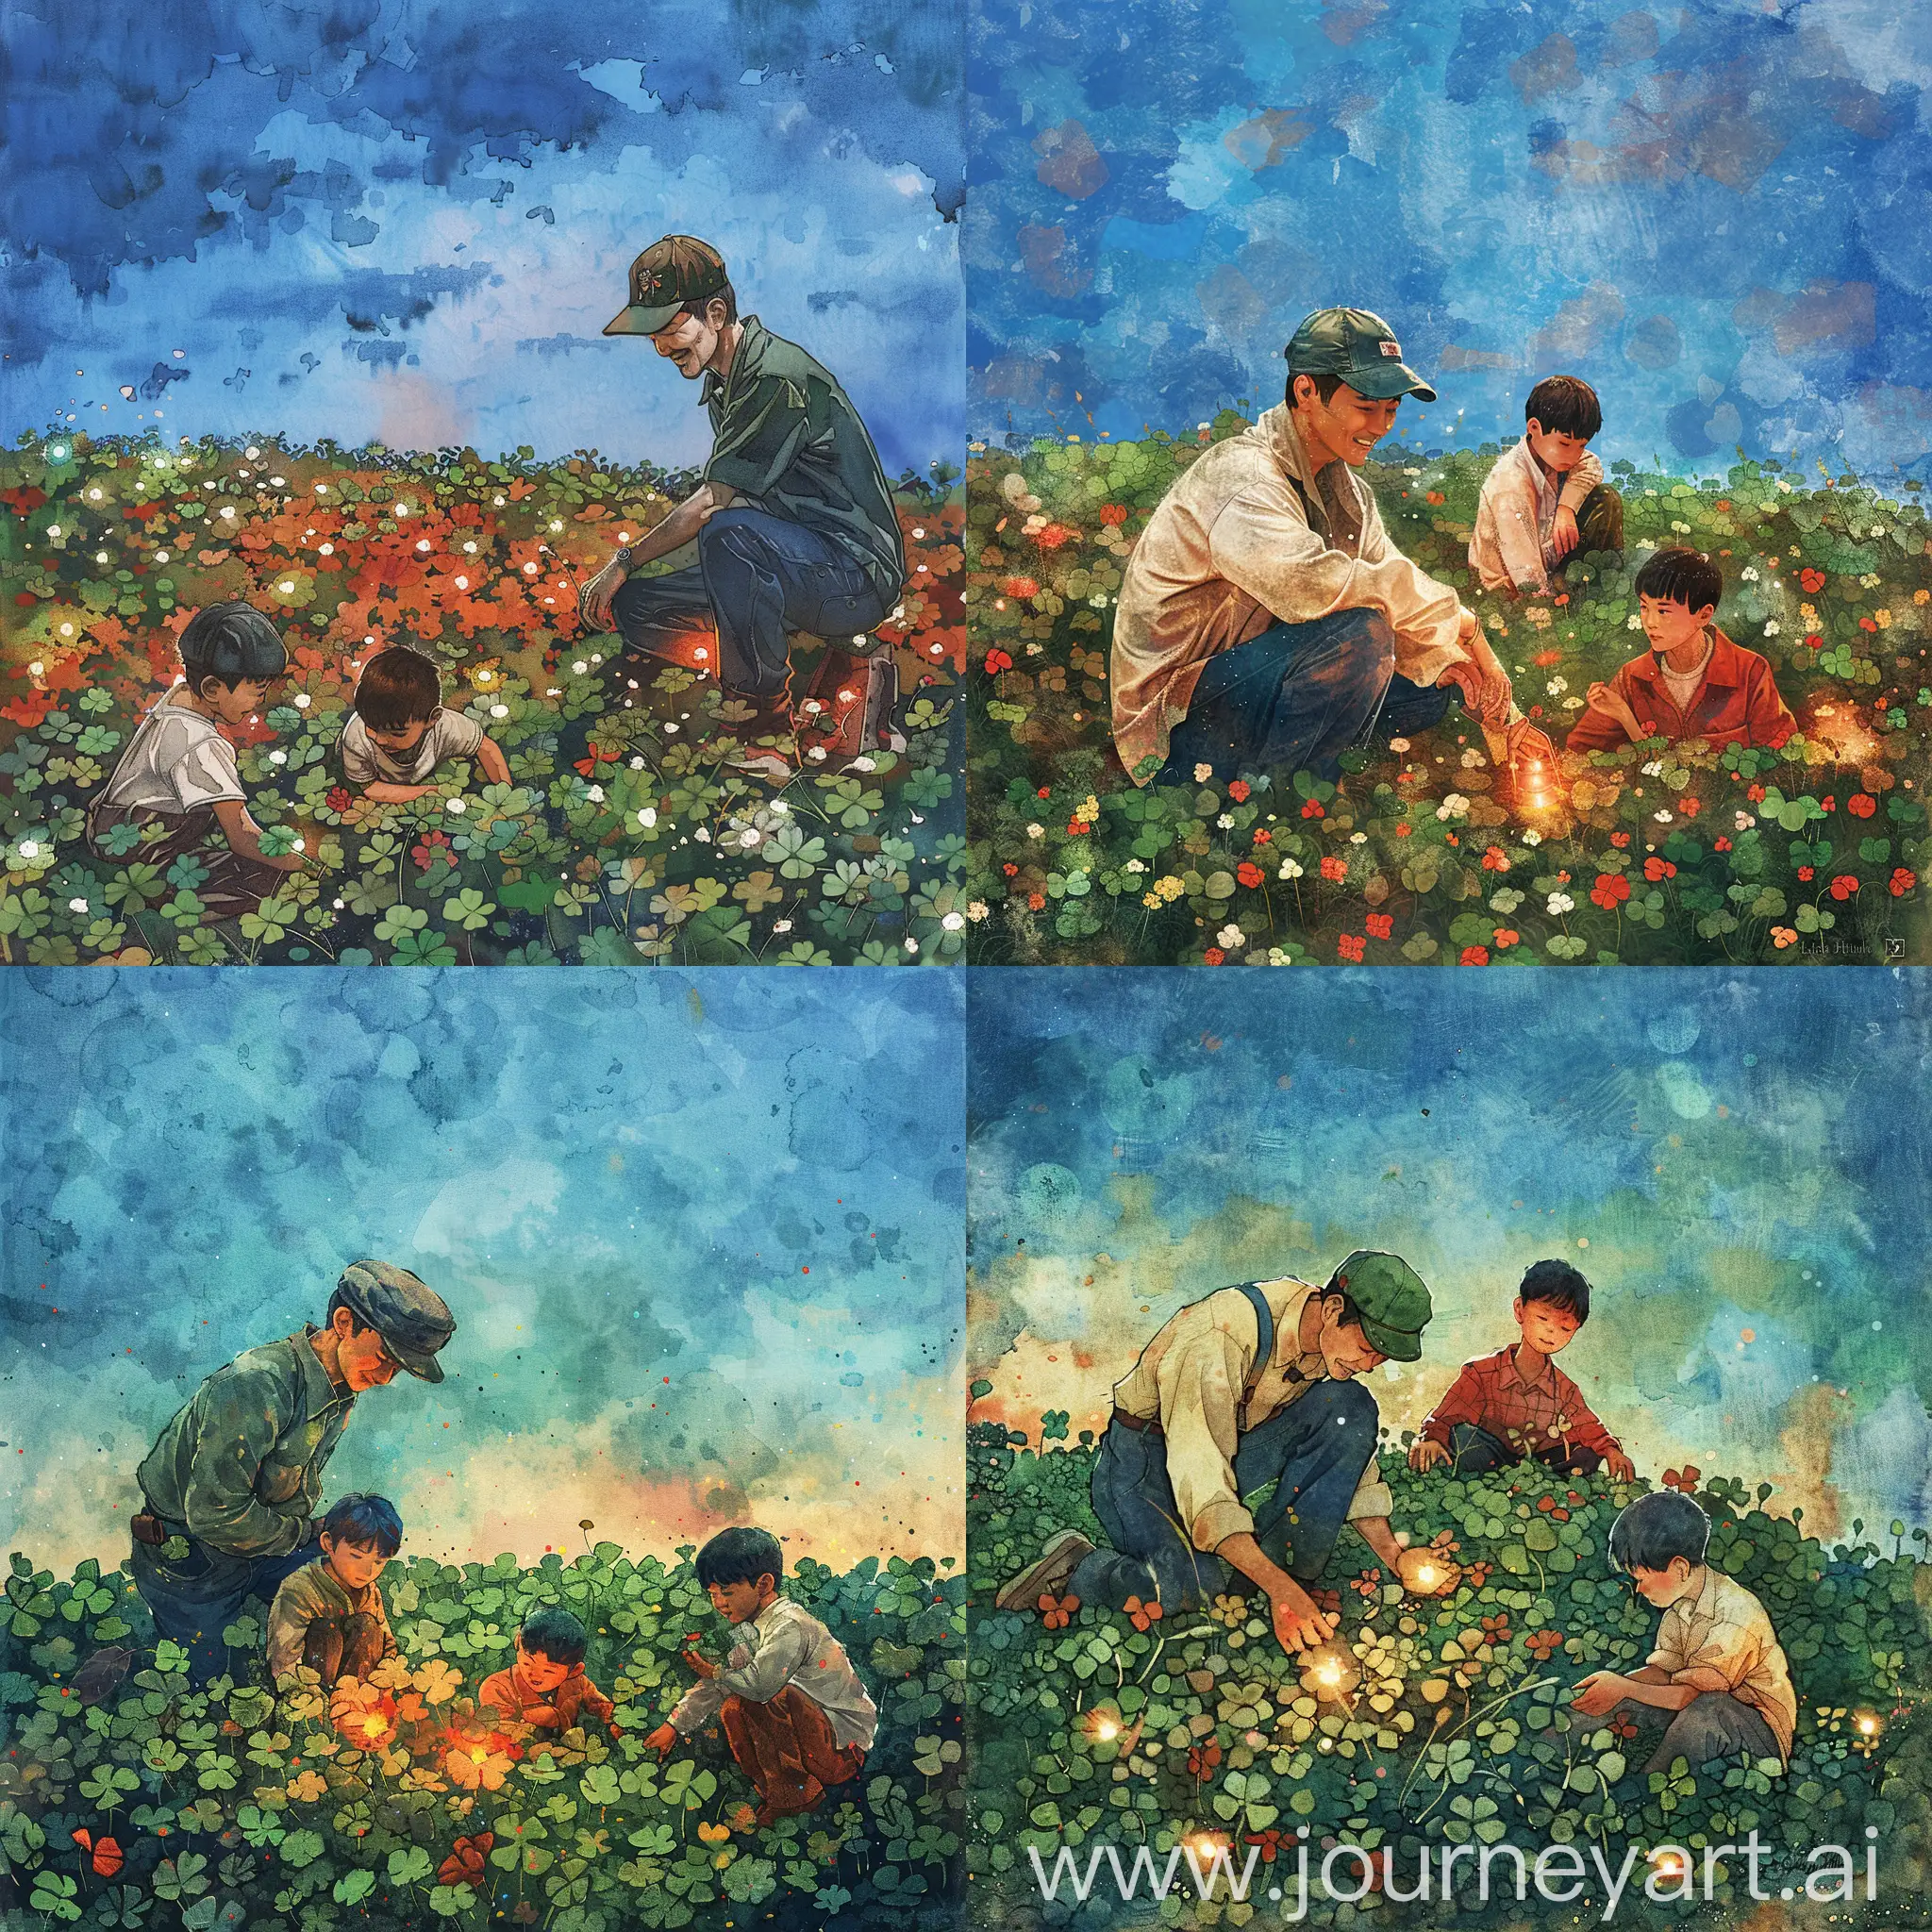 fantasy exploration, 1 adult Korean male explorer on cap, 2 boys of curious Surprised, field full of clover flowers, ((number lamp lights on clover flowers)), sitting around, picking clover, adventure of fantasy characters, illustration, abstract, texture, watercolor, illustrator, hand drawn texture, different colors like reds, oranges, greens, browns, greys, white and black. This scene evokes an atmosphere that feels both dreamy and fantastical, with a blue sky, in the style of an impressionist painter. 